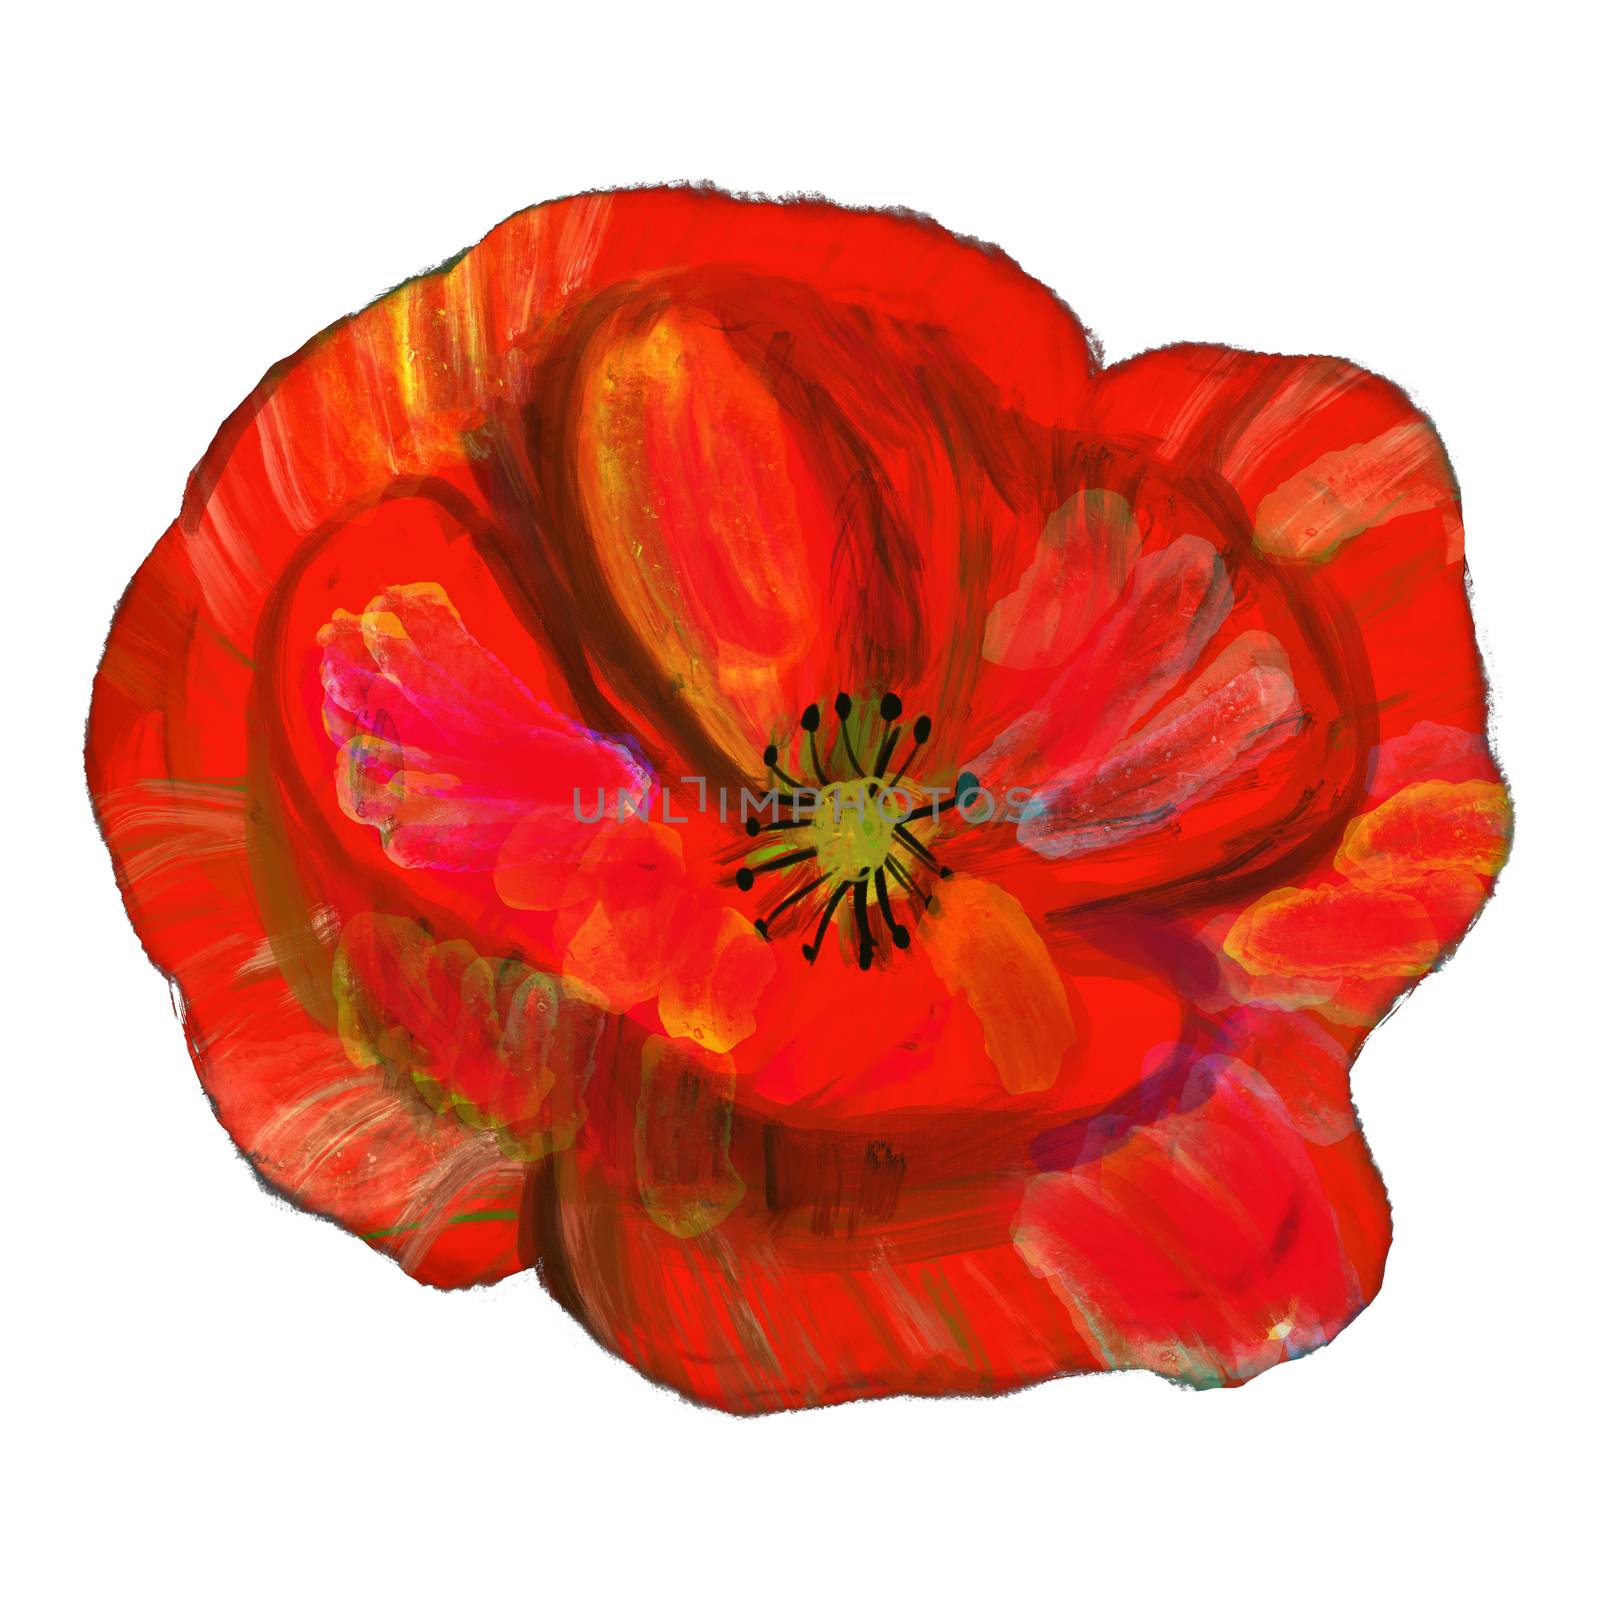 Single Red poppy flower isolated on white background. Simple floral hand drawn wildflower design.